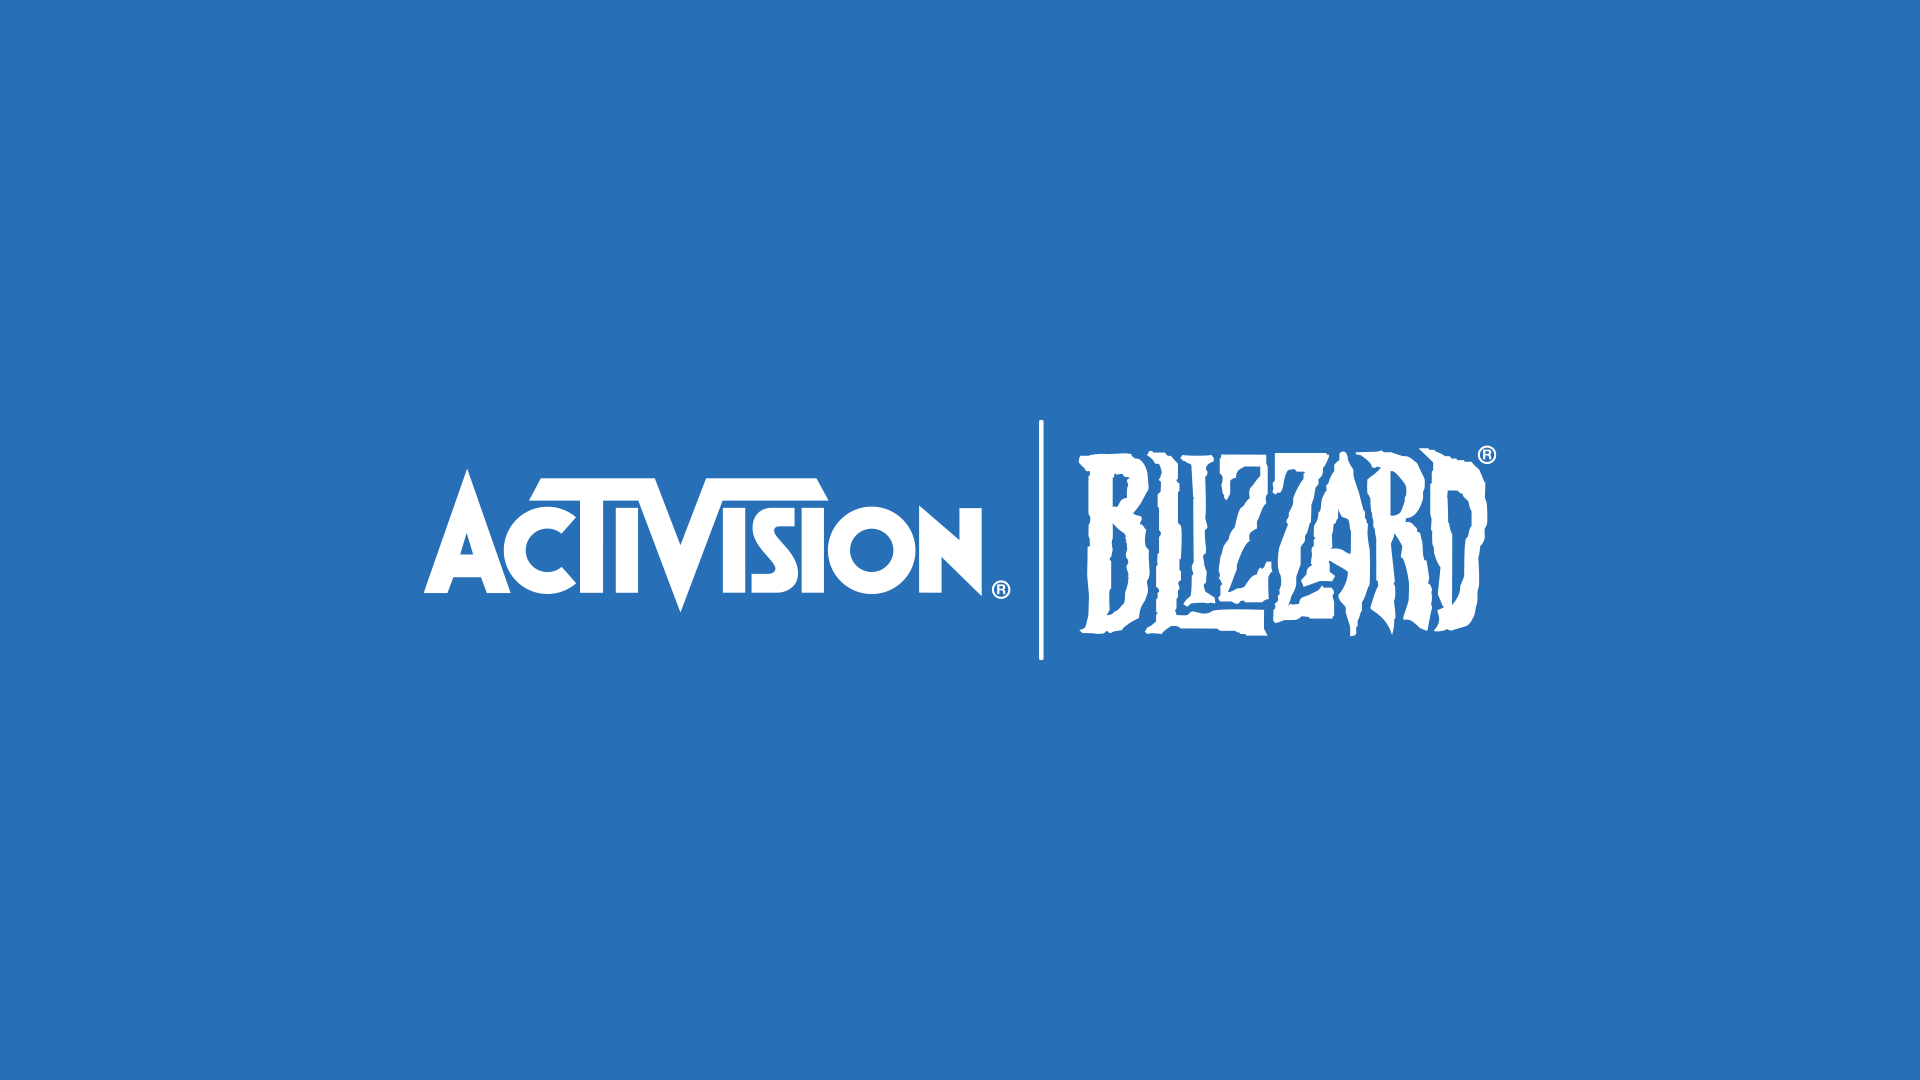 Activision Blizzard must give its pay equity studies to California